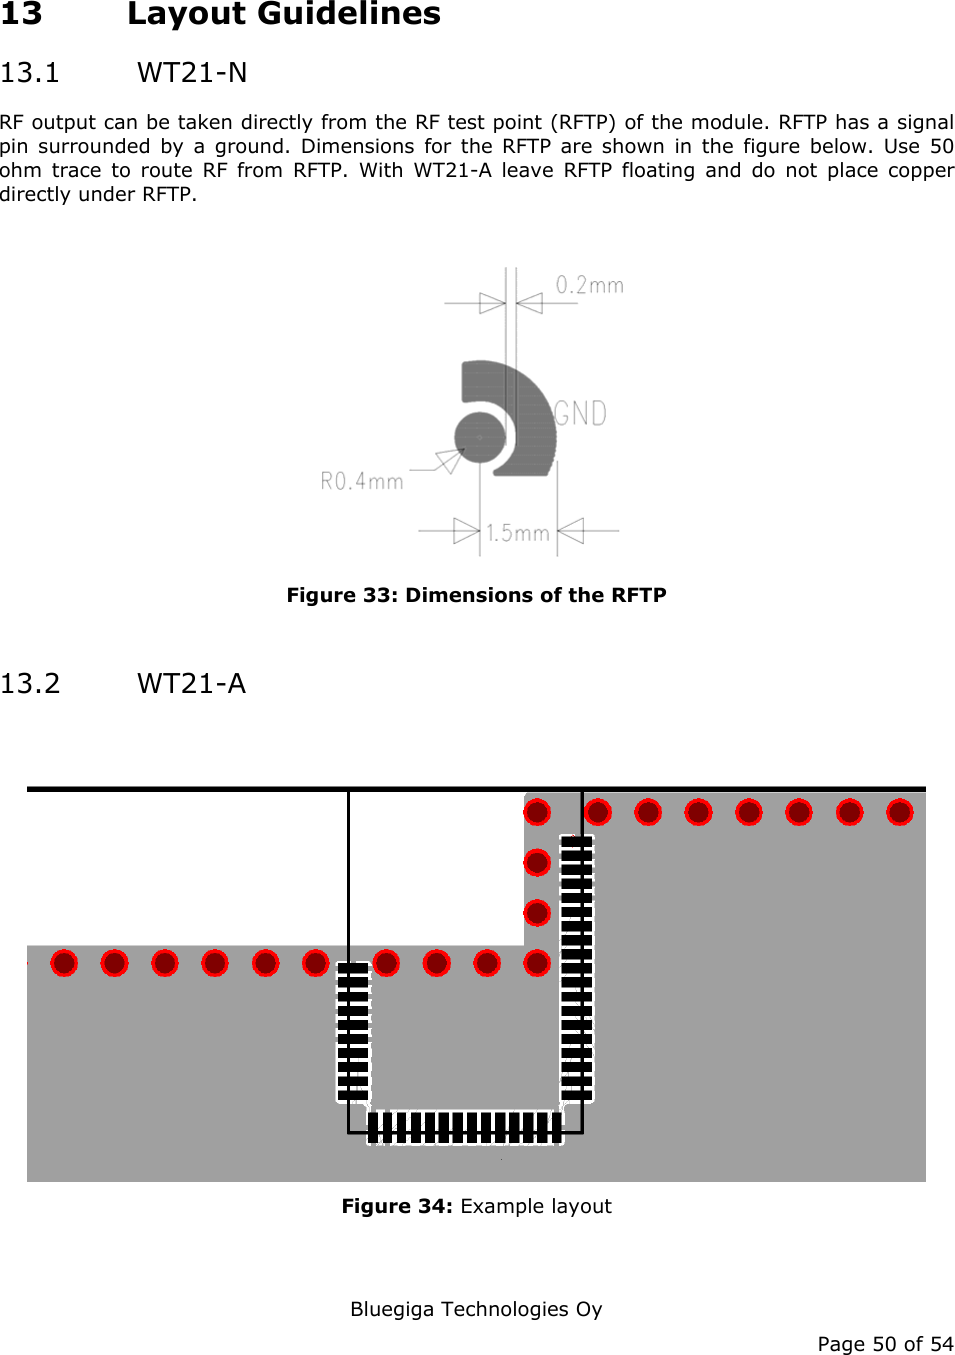   Bluegiga Technologies Oy Page 50 of 54 13 Layout Guidelines 13.1  WT21-N RF output can be taken directly from the RF test point (RFTP) of the module. RFTP has a signal pin surrounded by a ground. Dimensions for the RFTP are shown in the figure below. Use 50 ohm trace to route RF from RFTP. With WT21-A leave RFTP floating and do not place copper directly under RFTP.   Figure 33: Dimensions of the RFTP  13.2  WT21-A  Figure 34: Example layout   